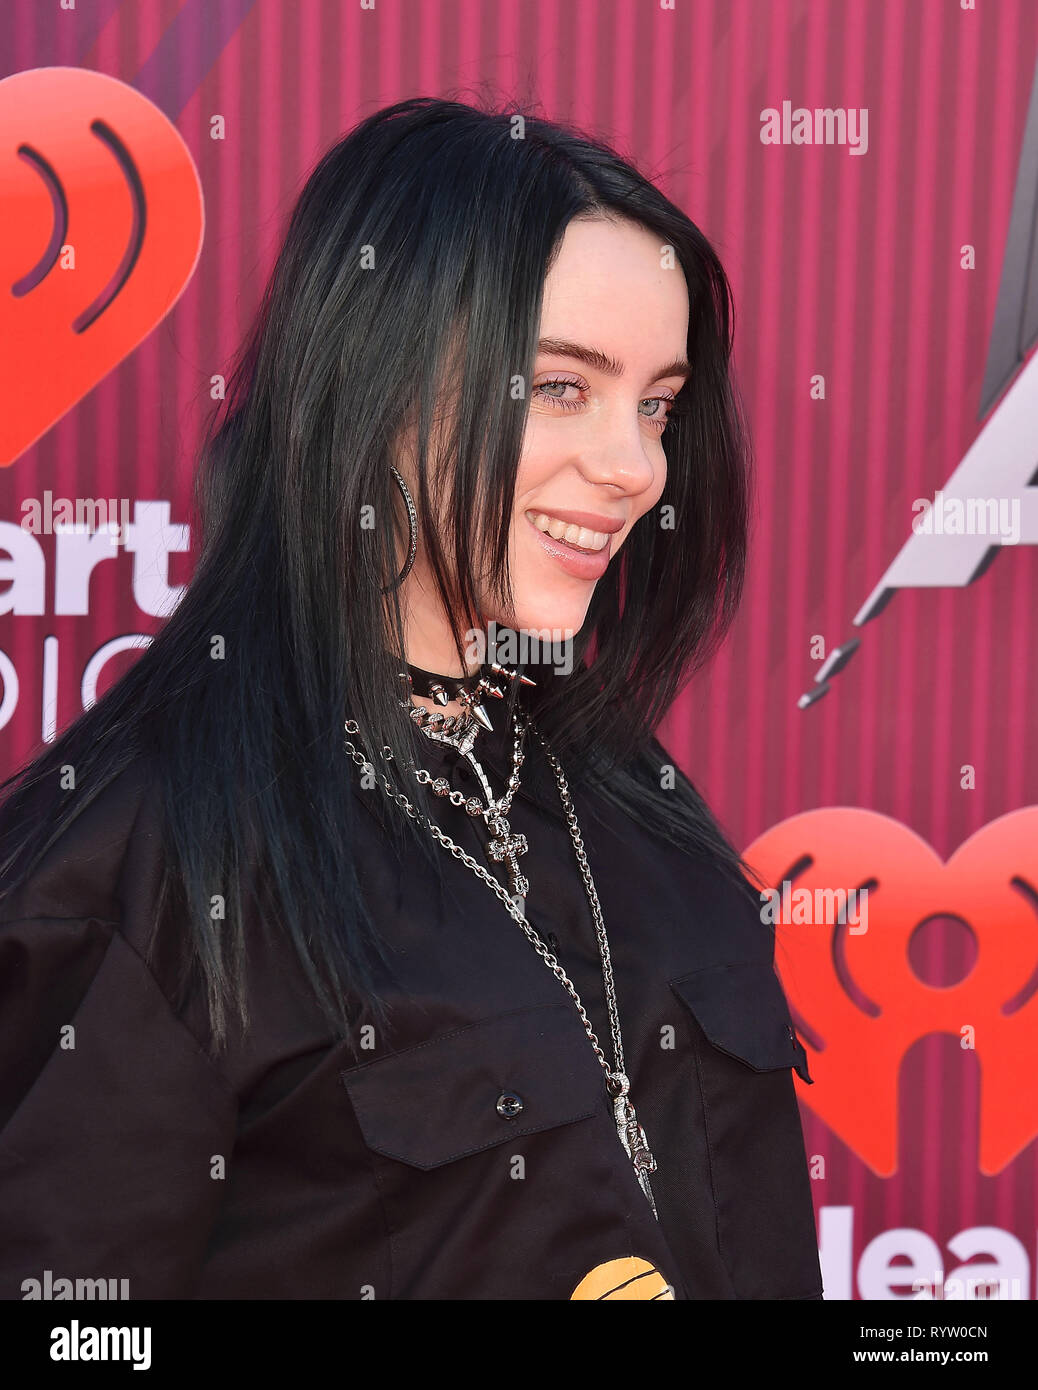 LOS ANGELES, CA - MARCH 14: Billie Eilish  attends the 2019 iHeartRadio Music Awards which broadcasted live on FOX at Microsoft Theater on March 14, 2019 in Los Angeles, California. Stock Photo